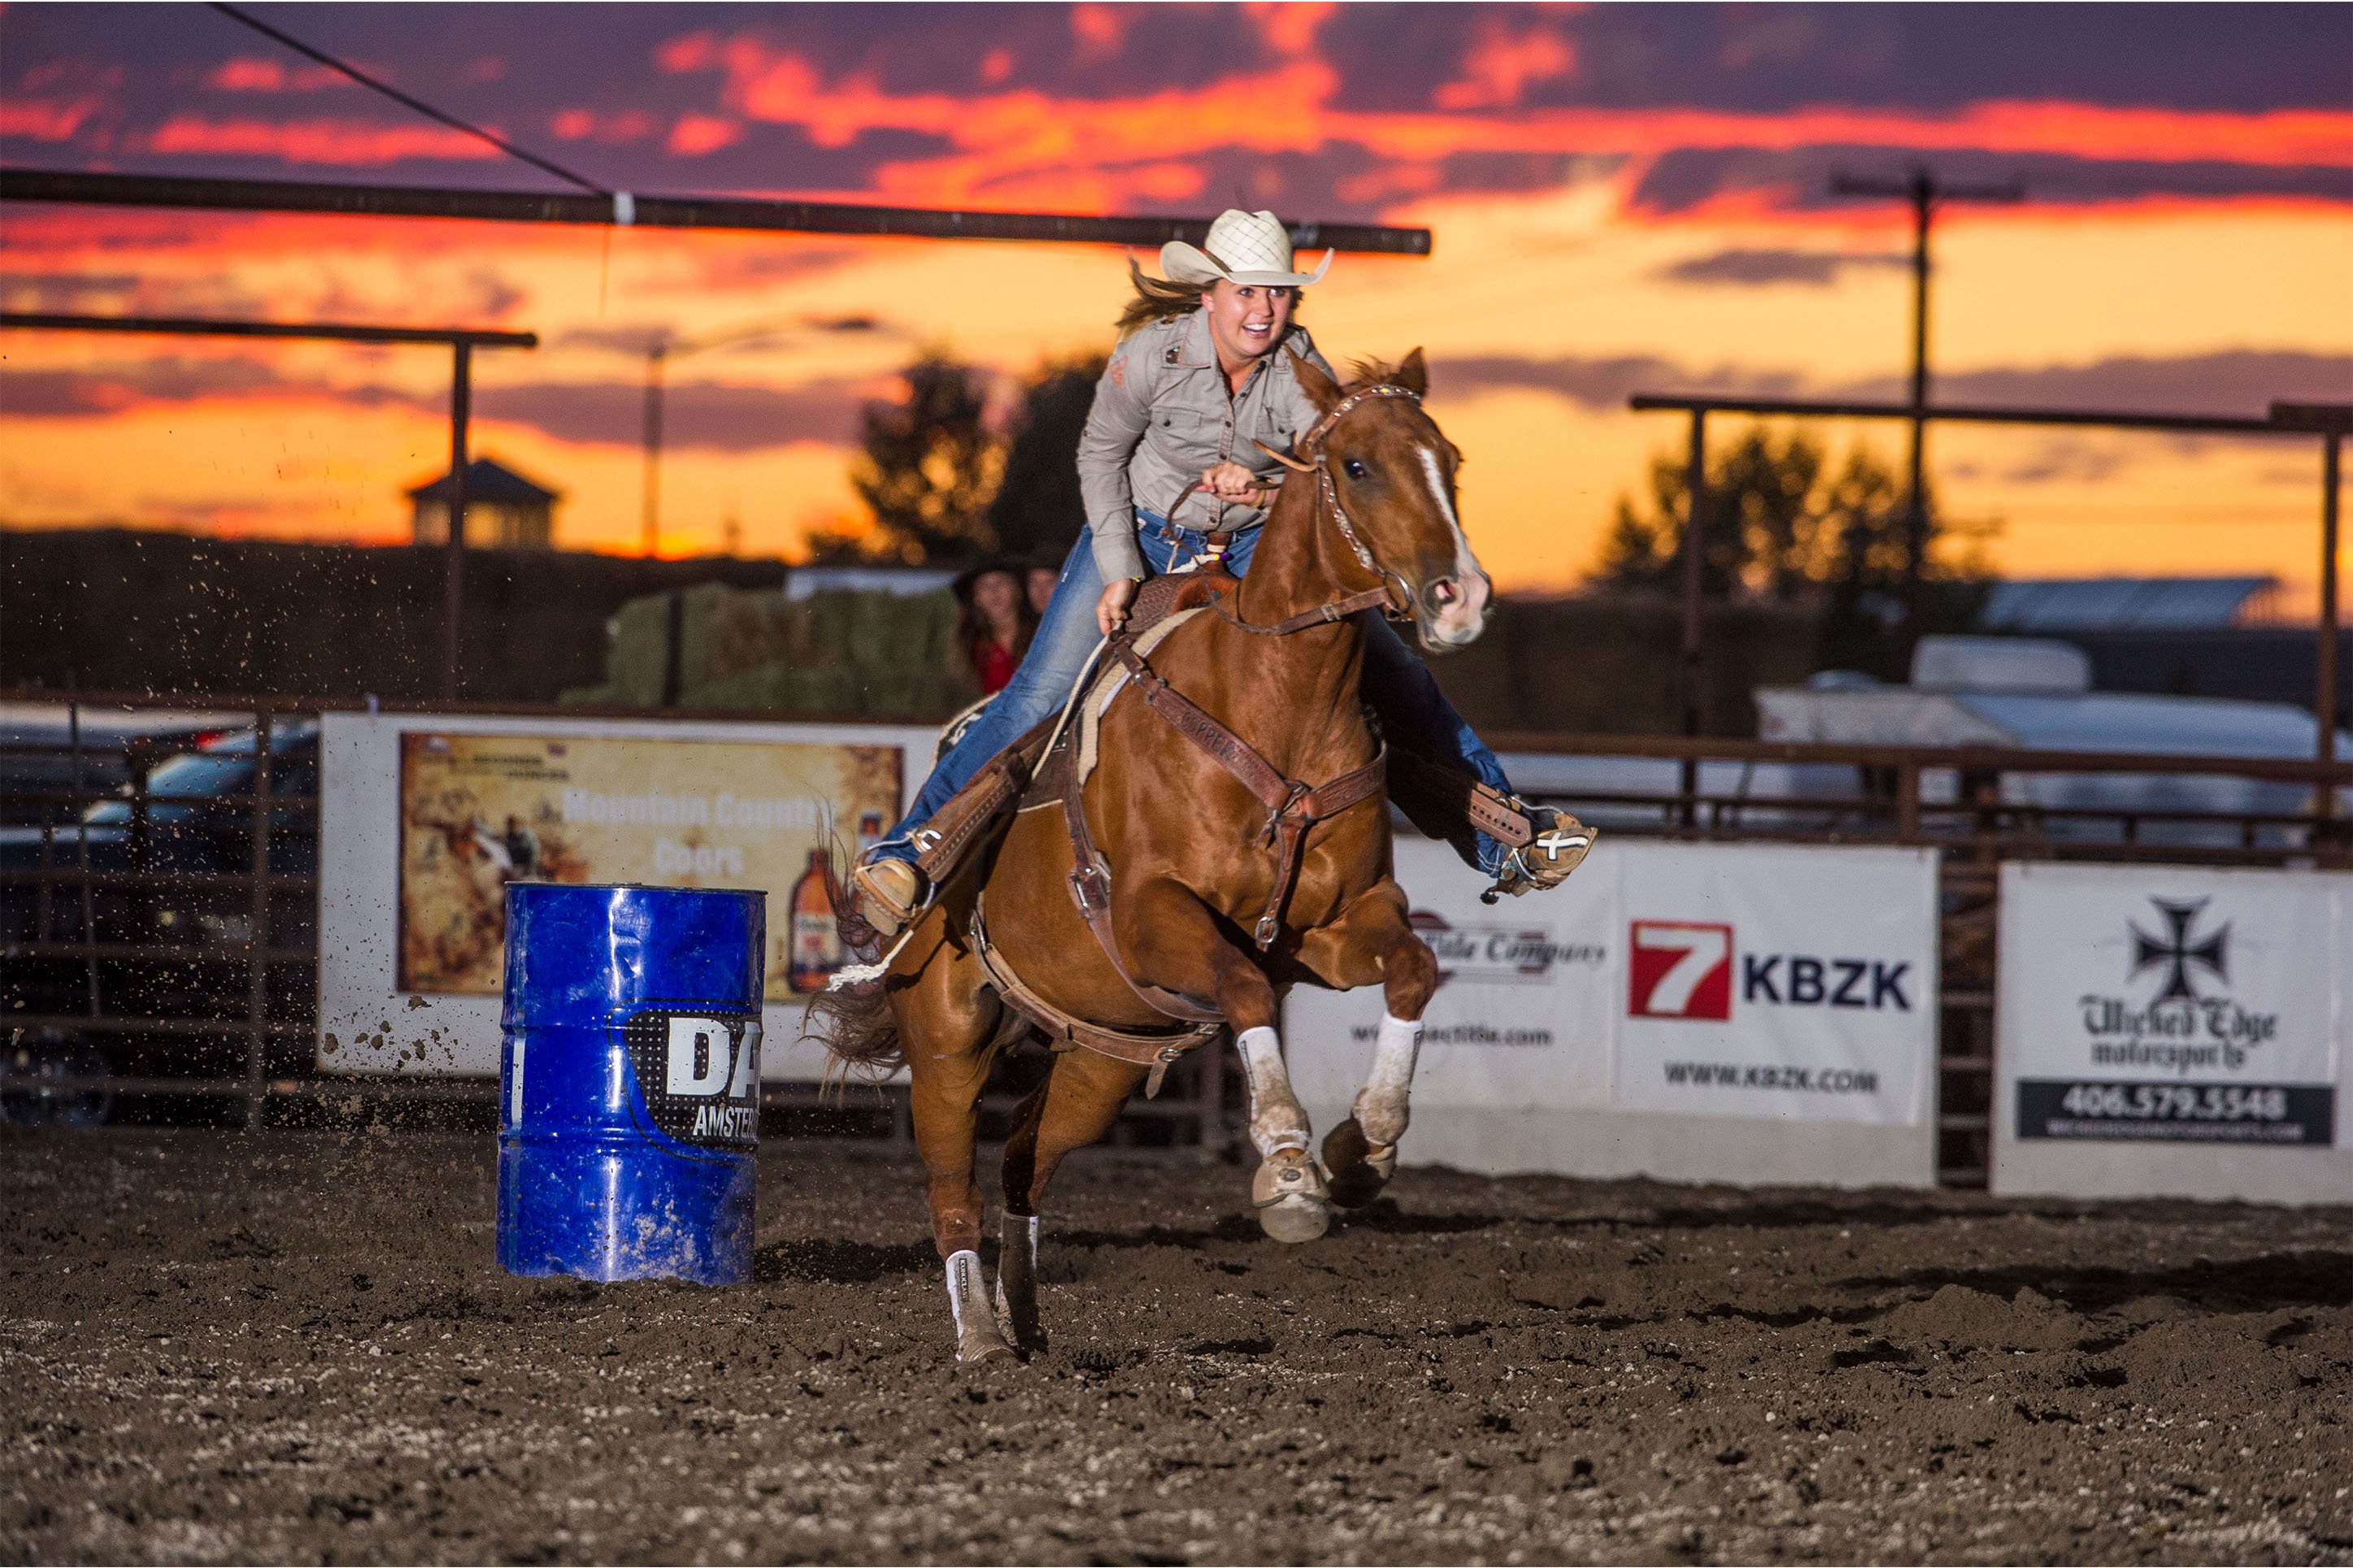 Barrel racer at Big Sky Country State Fair